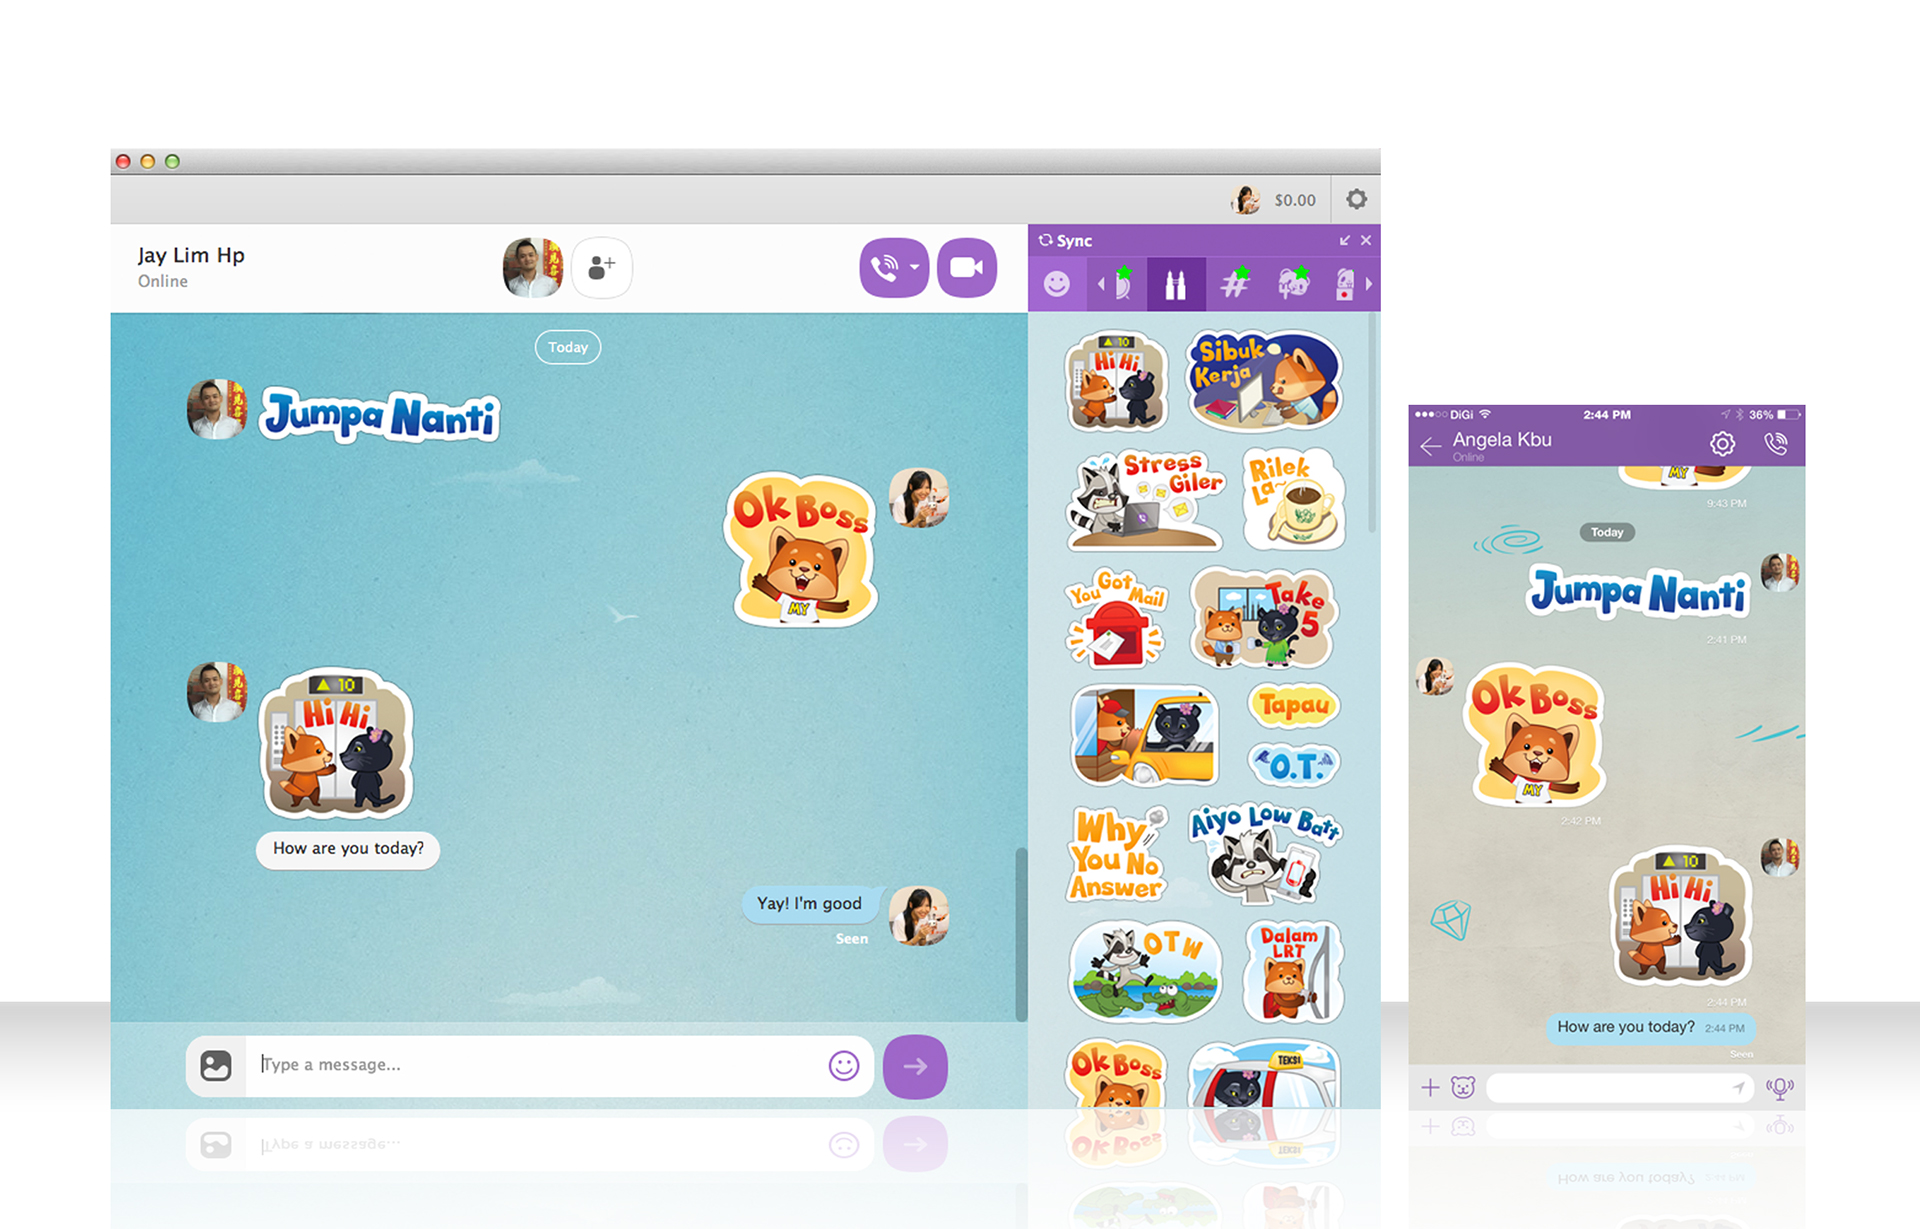 Popular in malaysia? is viber Receive Free